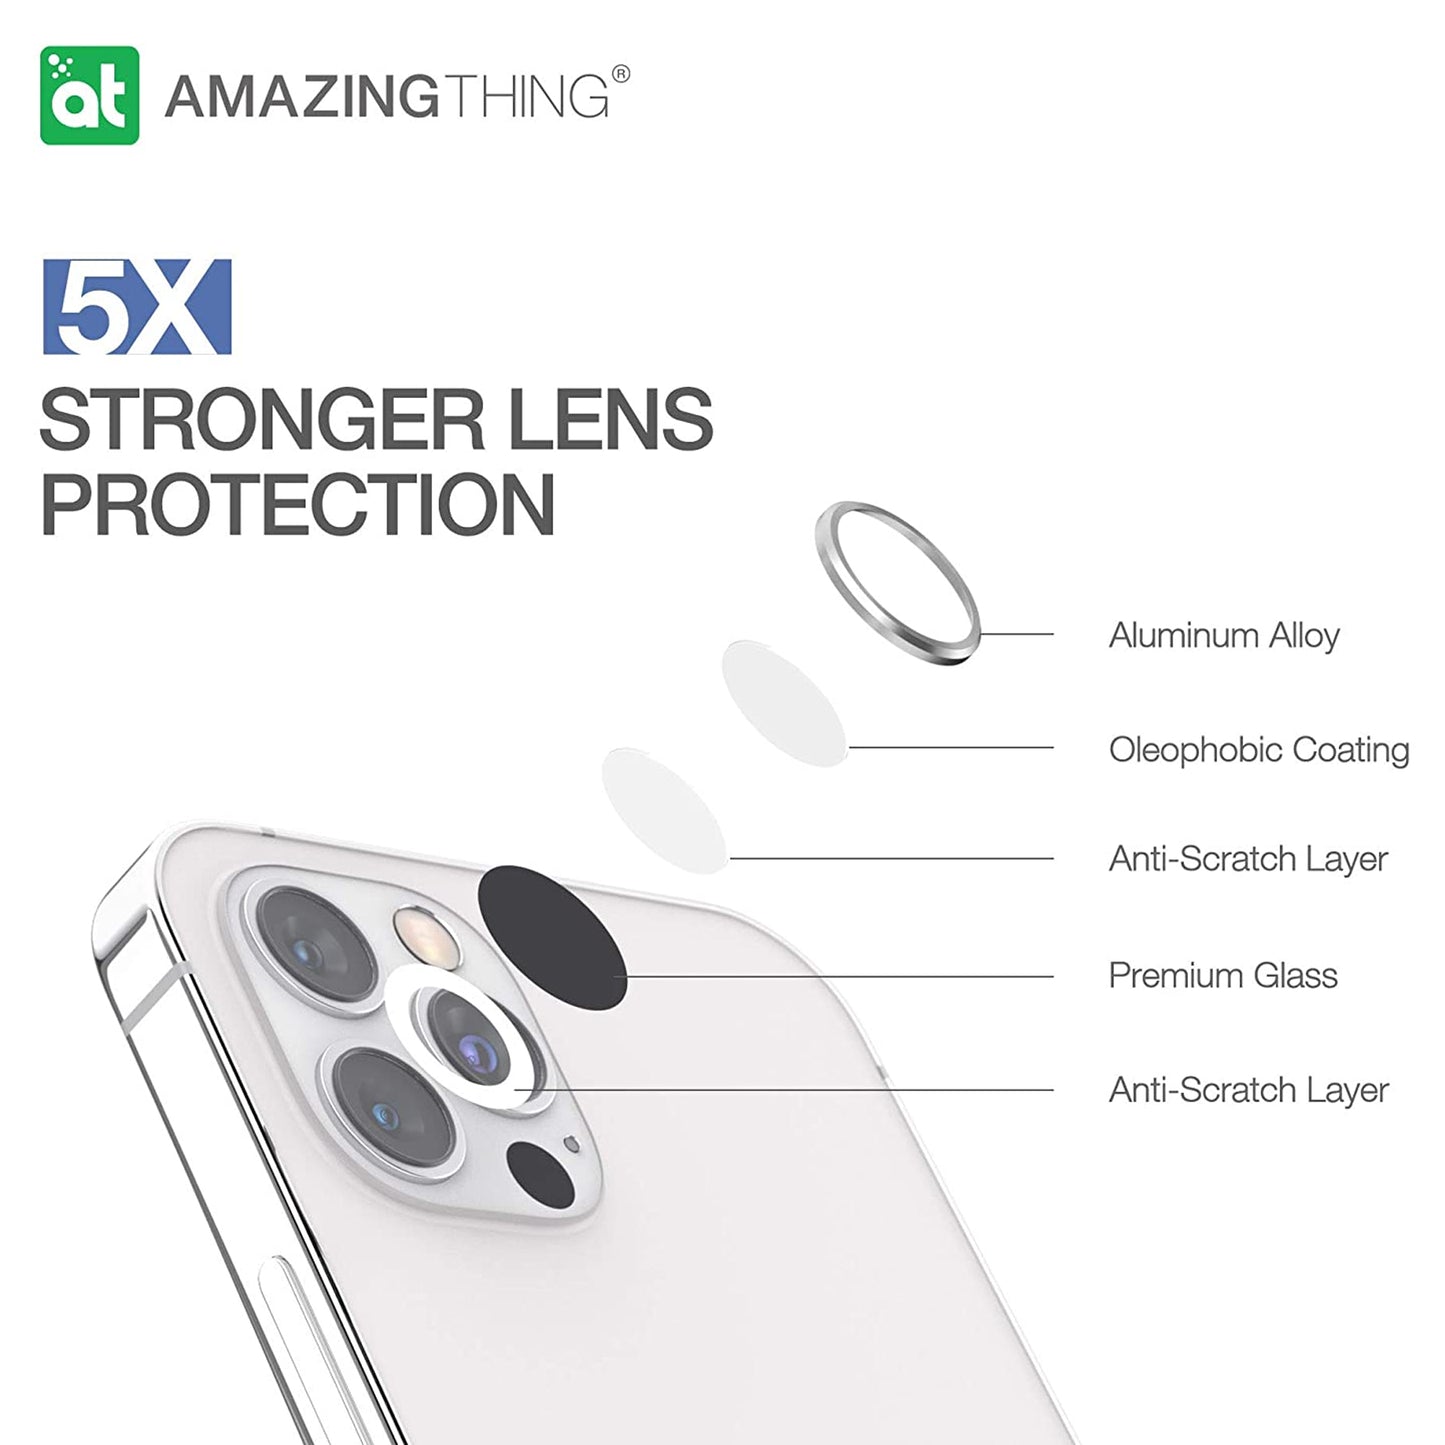 AMAZINGthing SUPREME AR 3D LensGlass Protector for iPhone 13 - 13 Mini 5G ( Two Lens ) - Symphony Purple (Barcode: 4892878069489 )